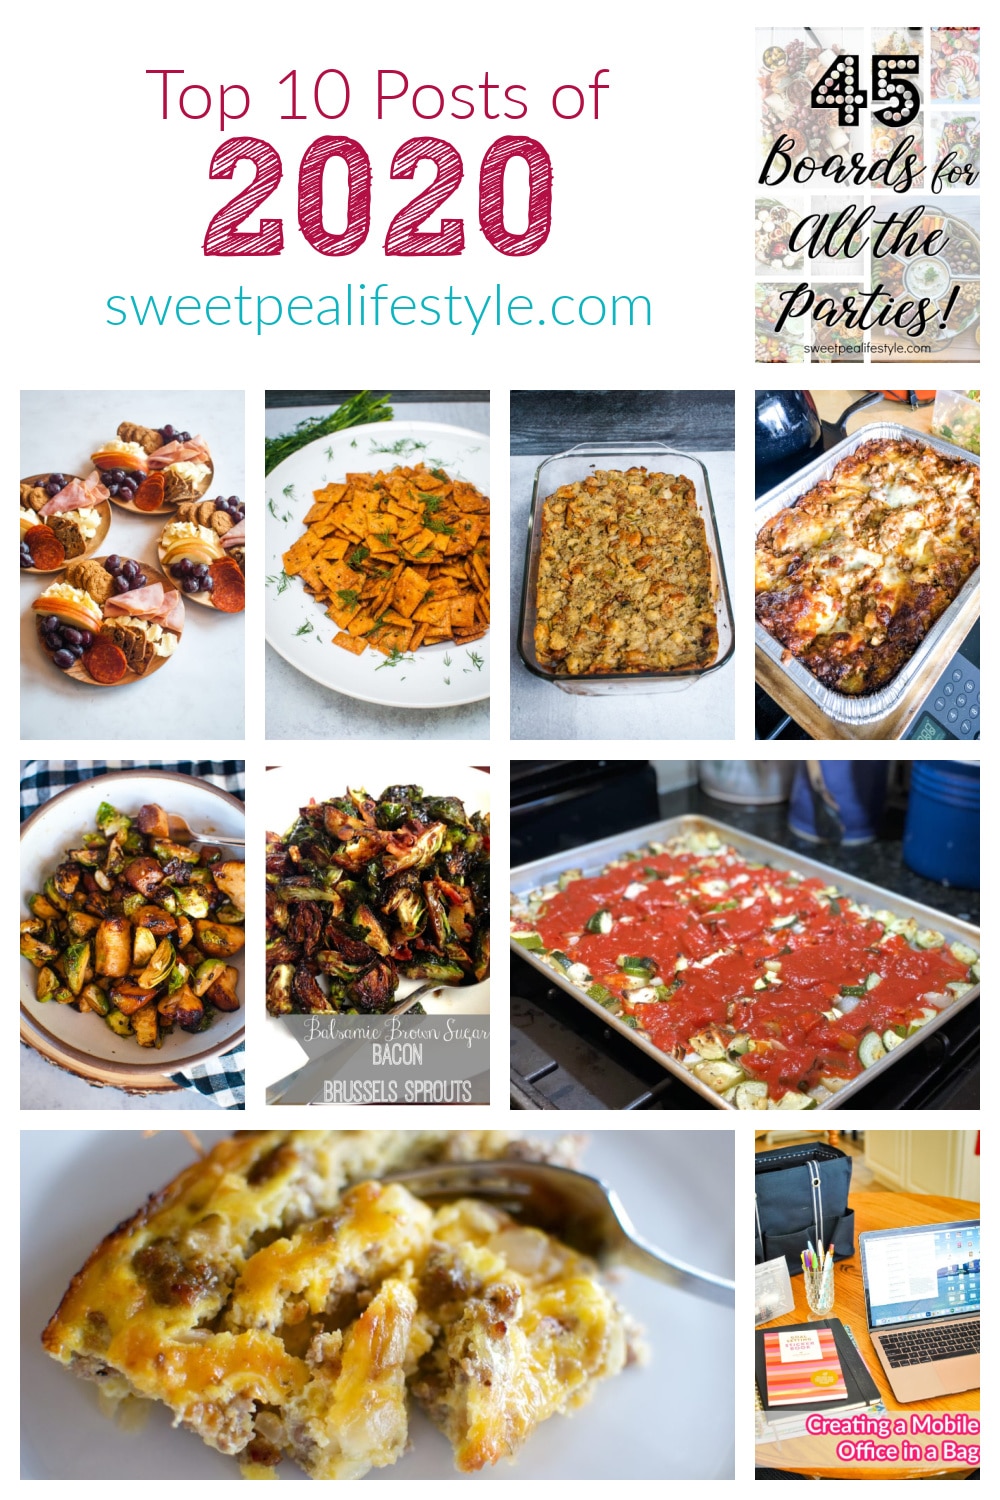 Top 10 Posts of 2020 by Sweetpea Lifestyle